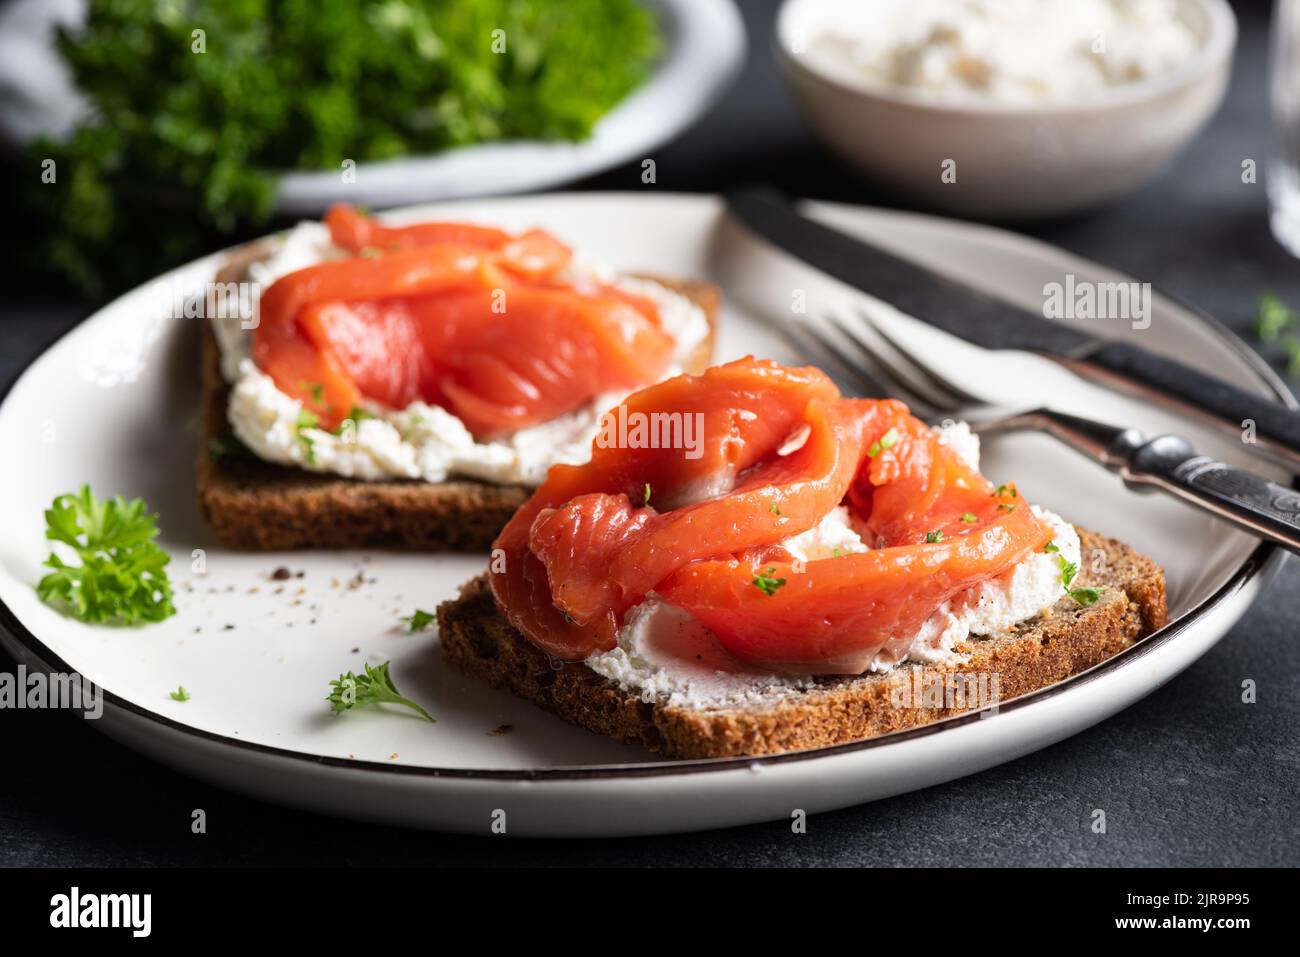 Rye bread sandwich with salmon and cream cheese, closeup view Stock Photo